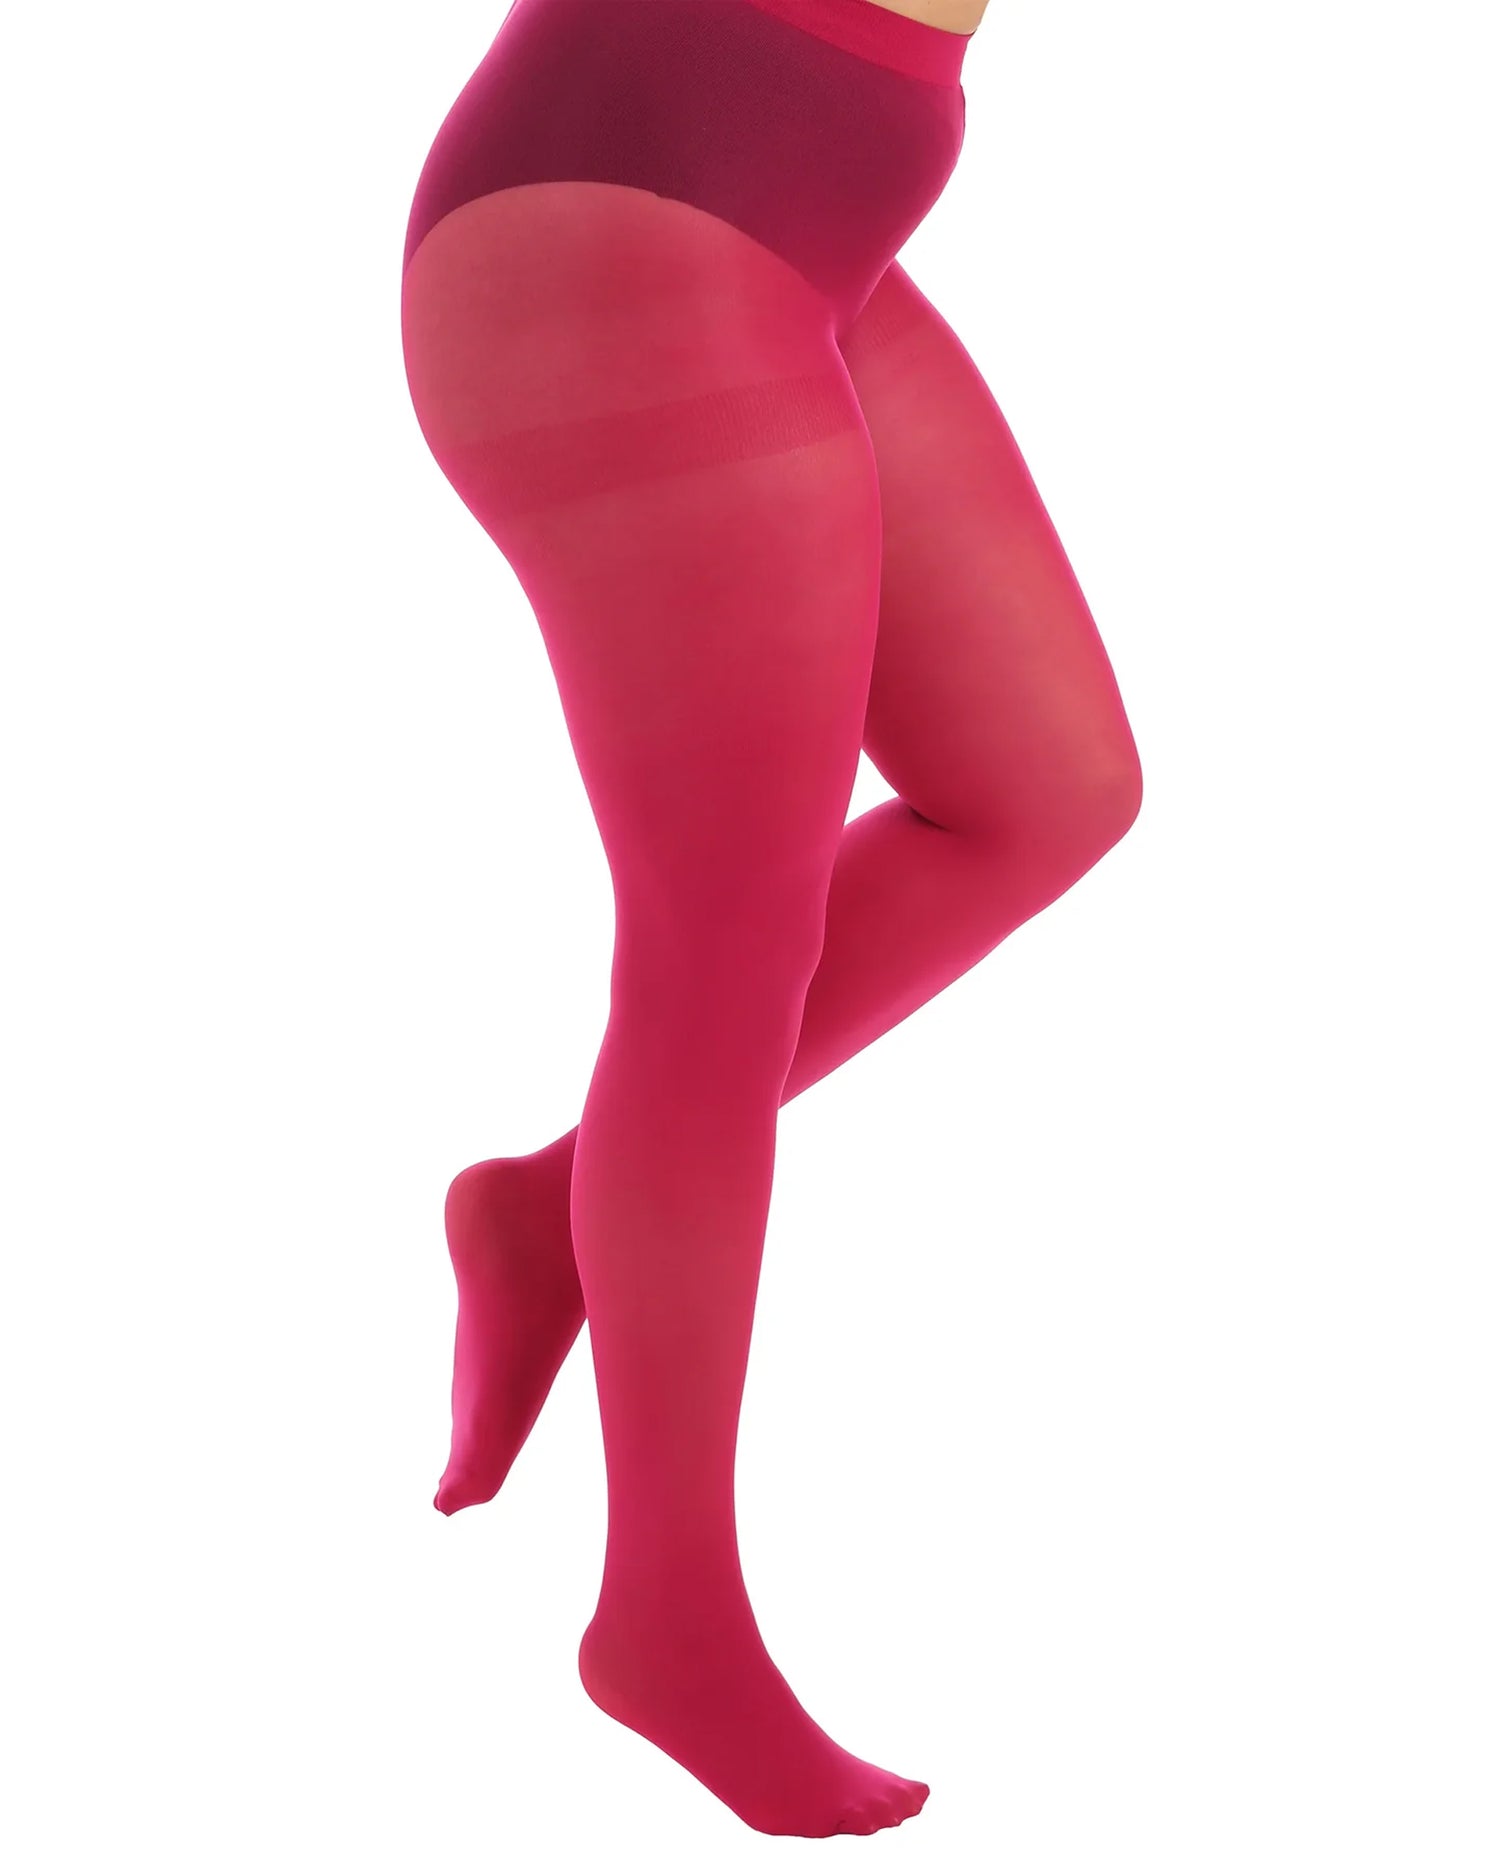 Curvy plus size woman wearing pink opaque tights and black underwear briefs